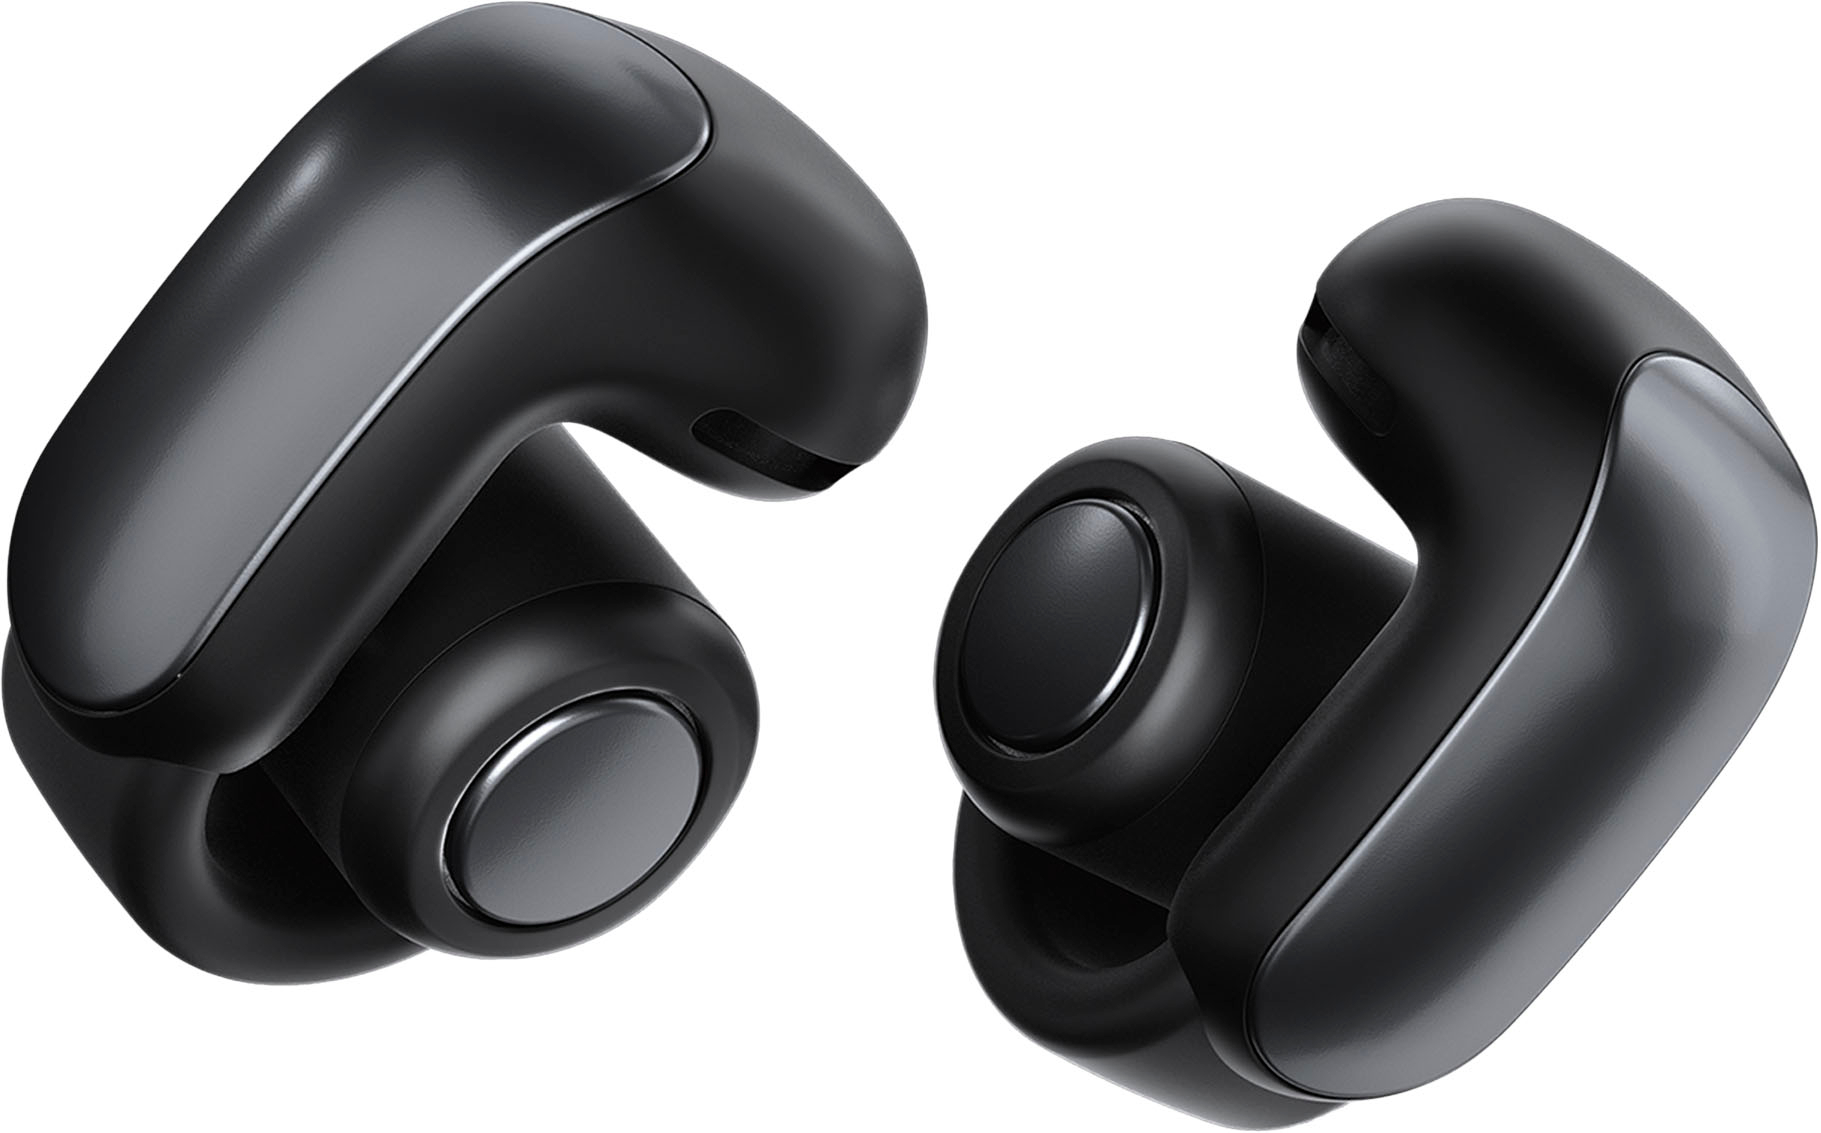 Sony's Affordable TWS Earbuds  In a world of Apple and Bose' TWS